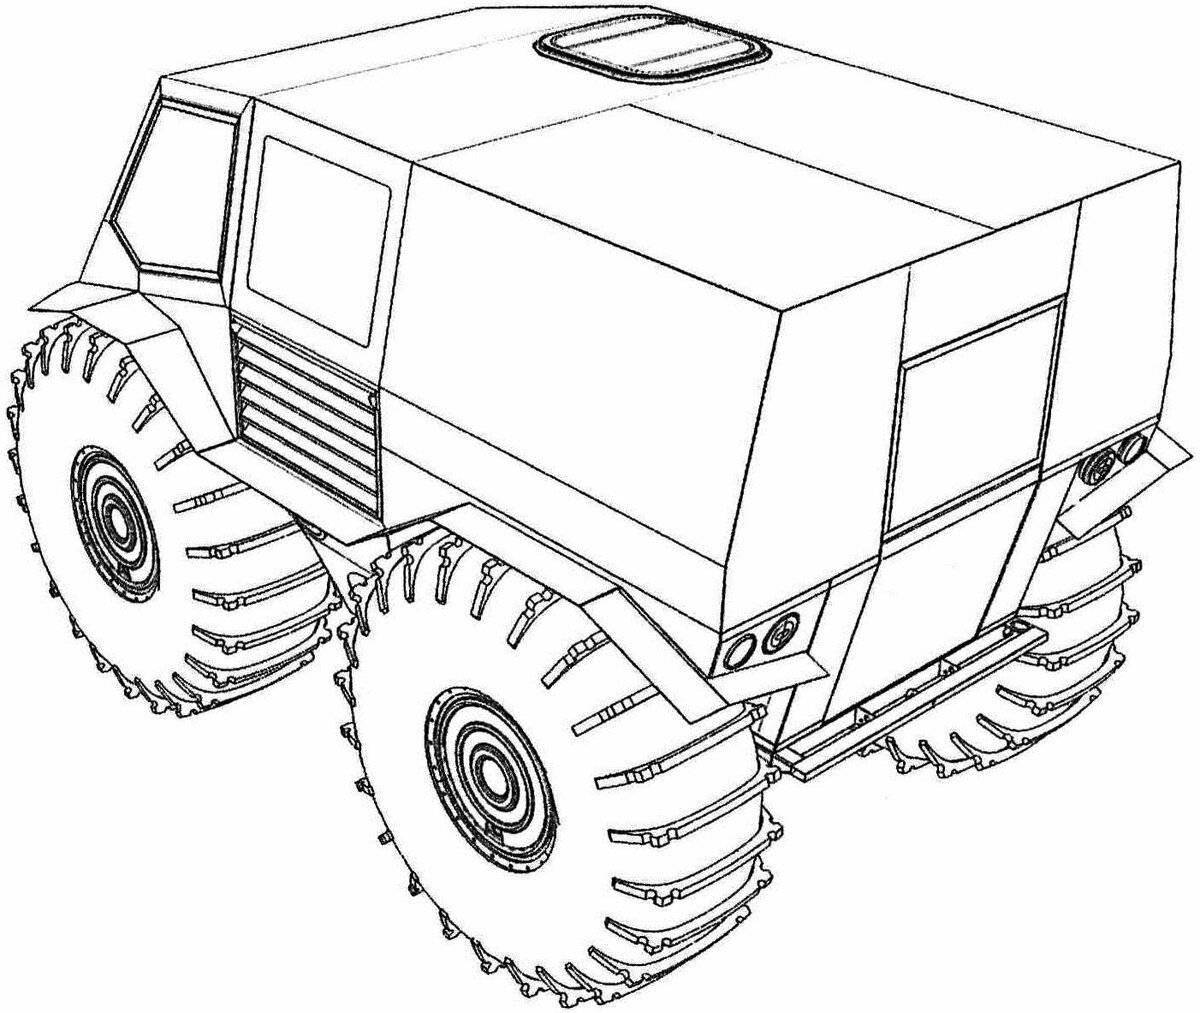 Coloring page wonderful all-terrain vehicle